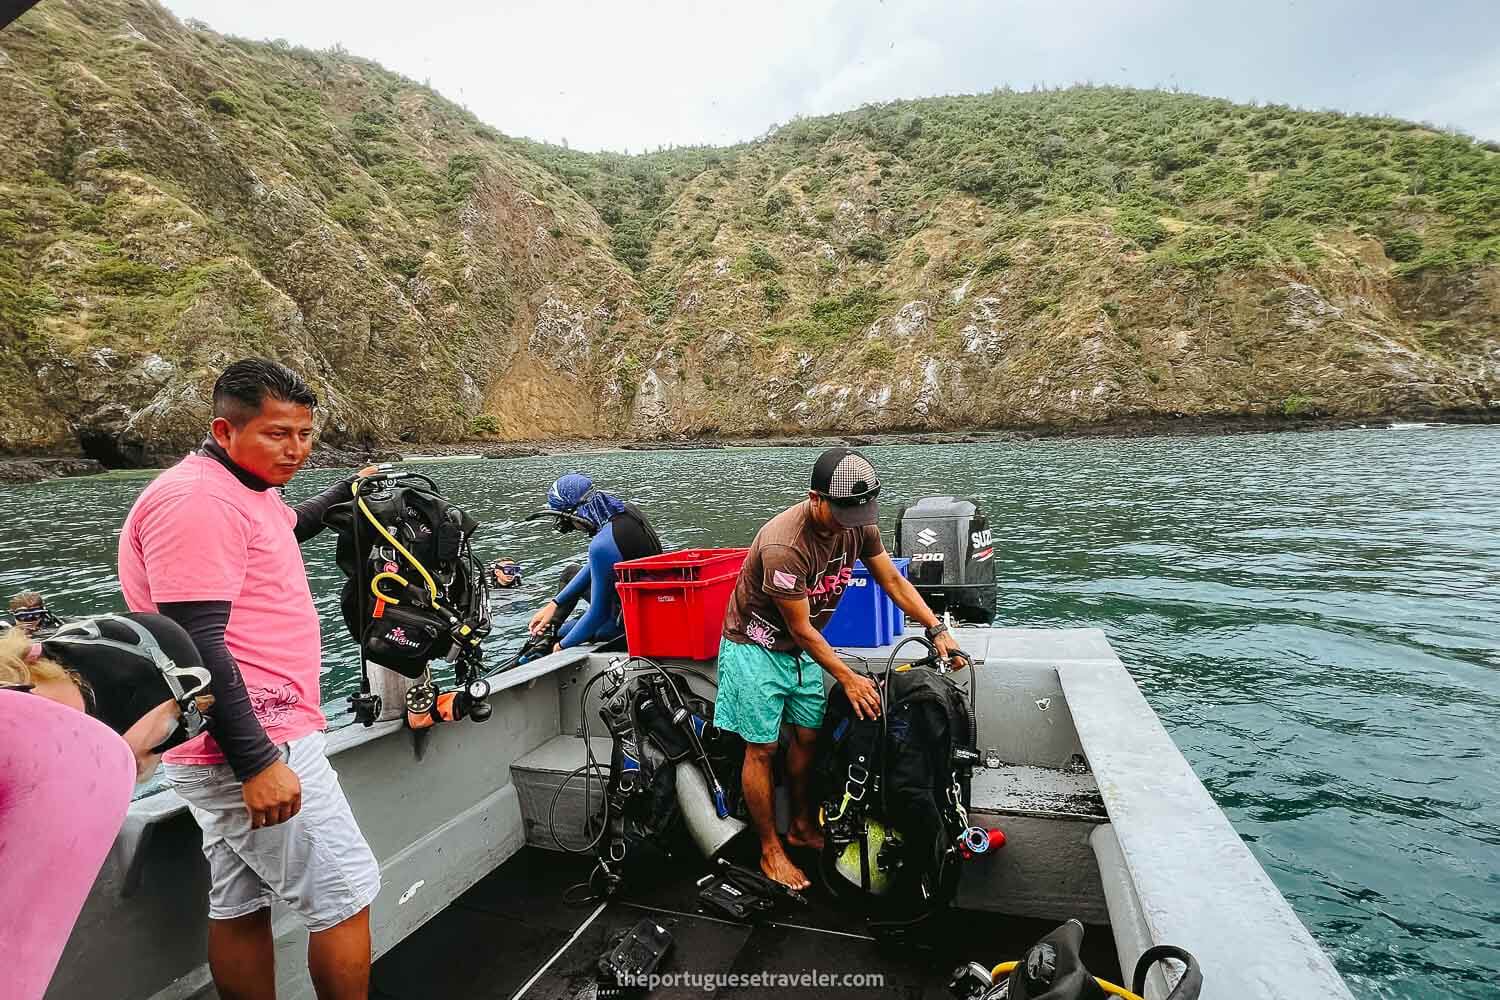 Getting everything ready on the boat for the first dive